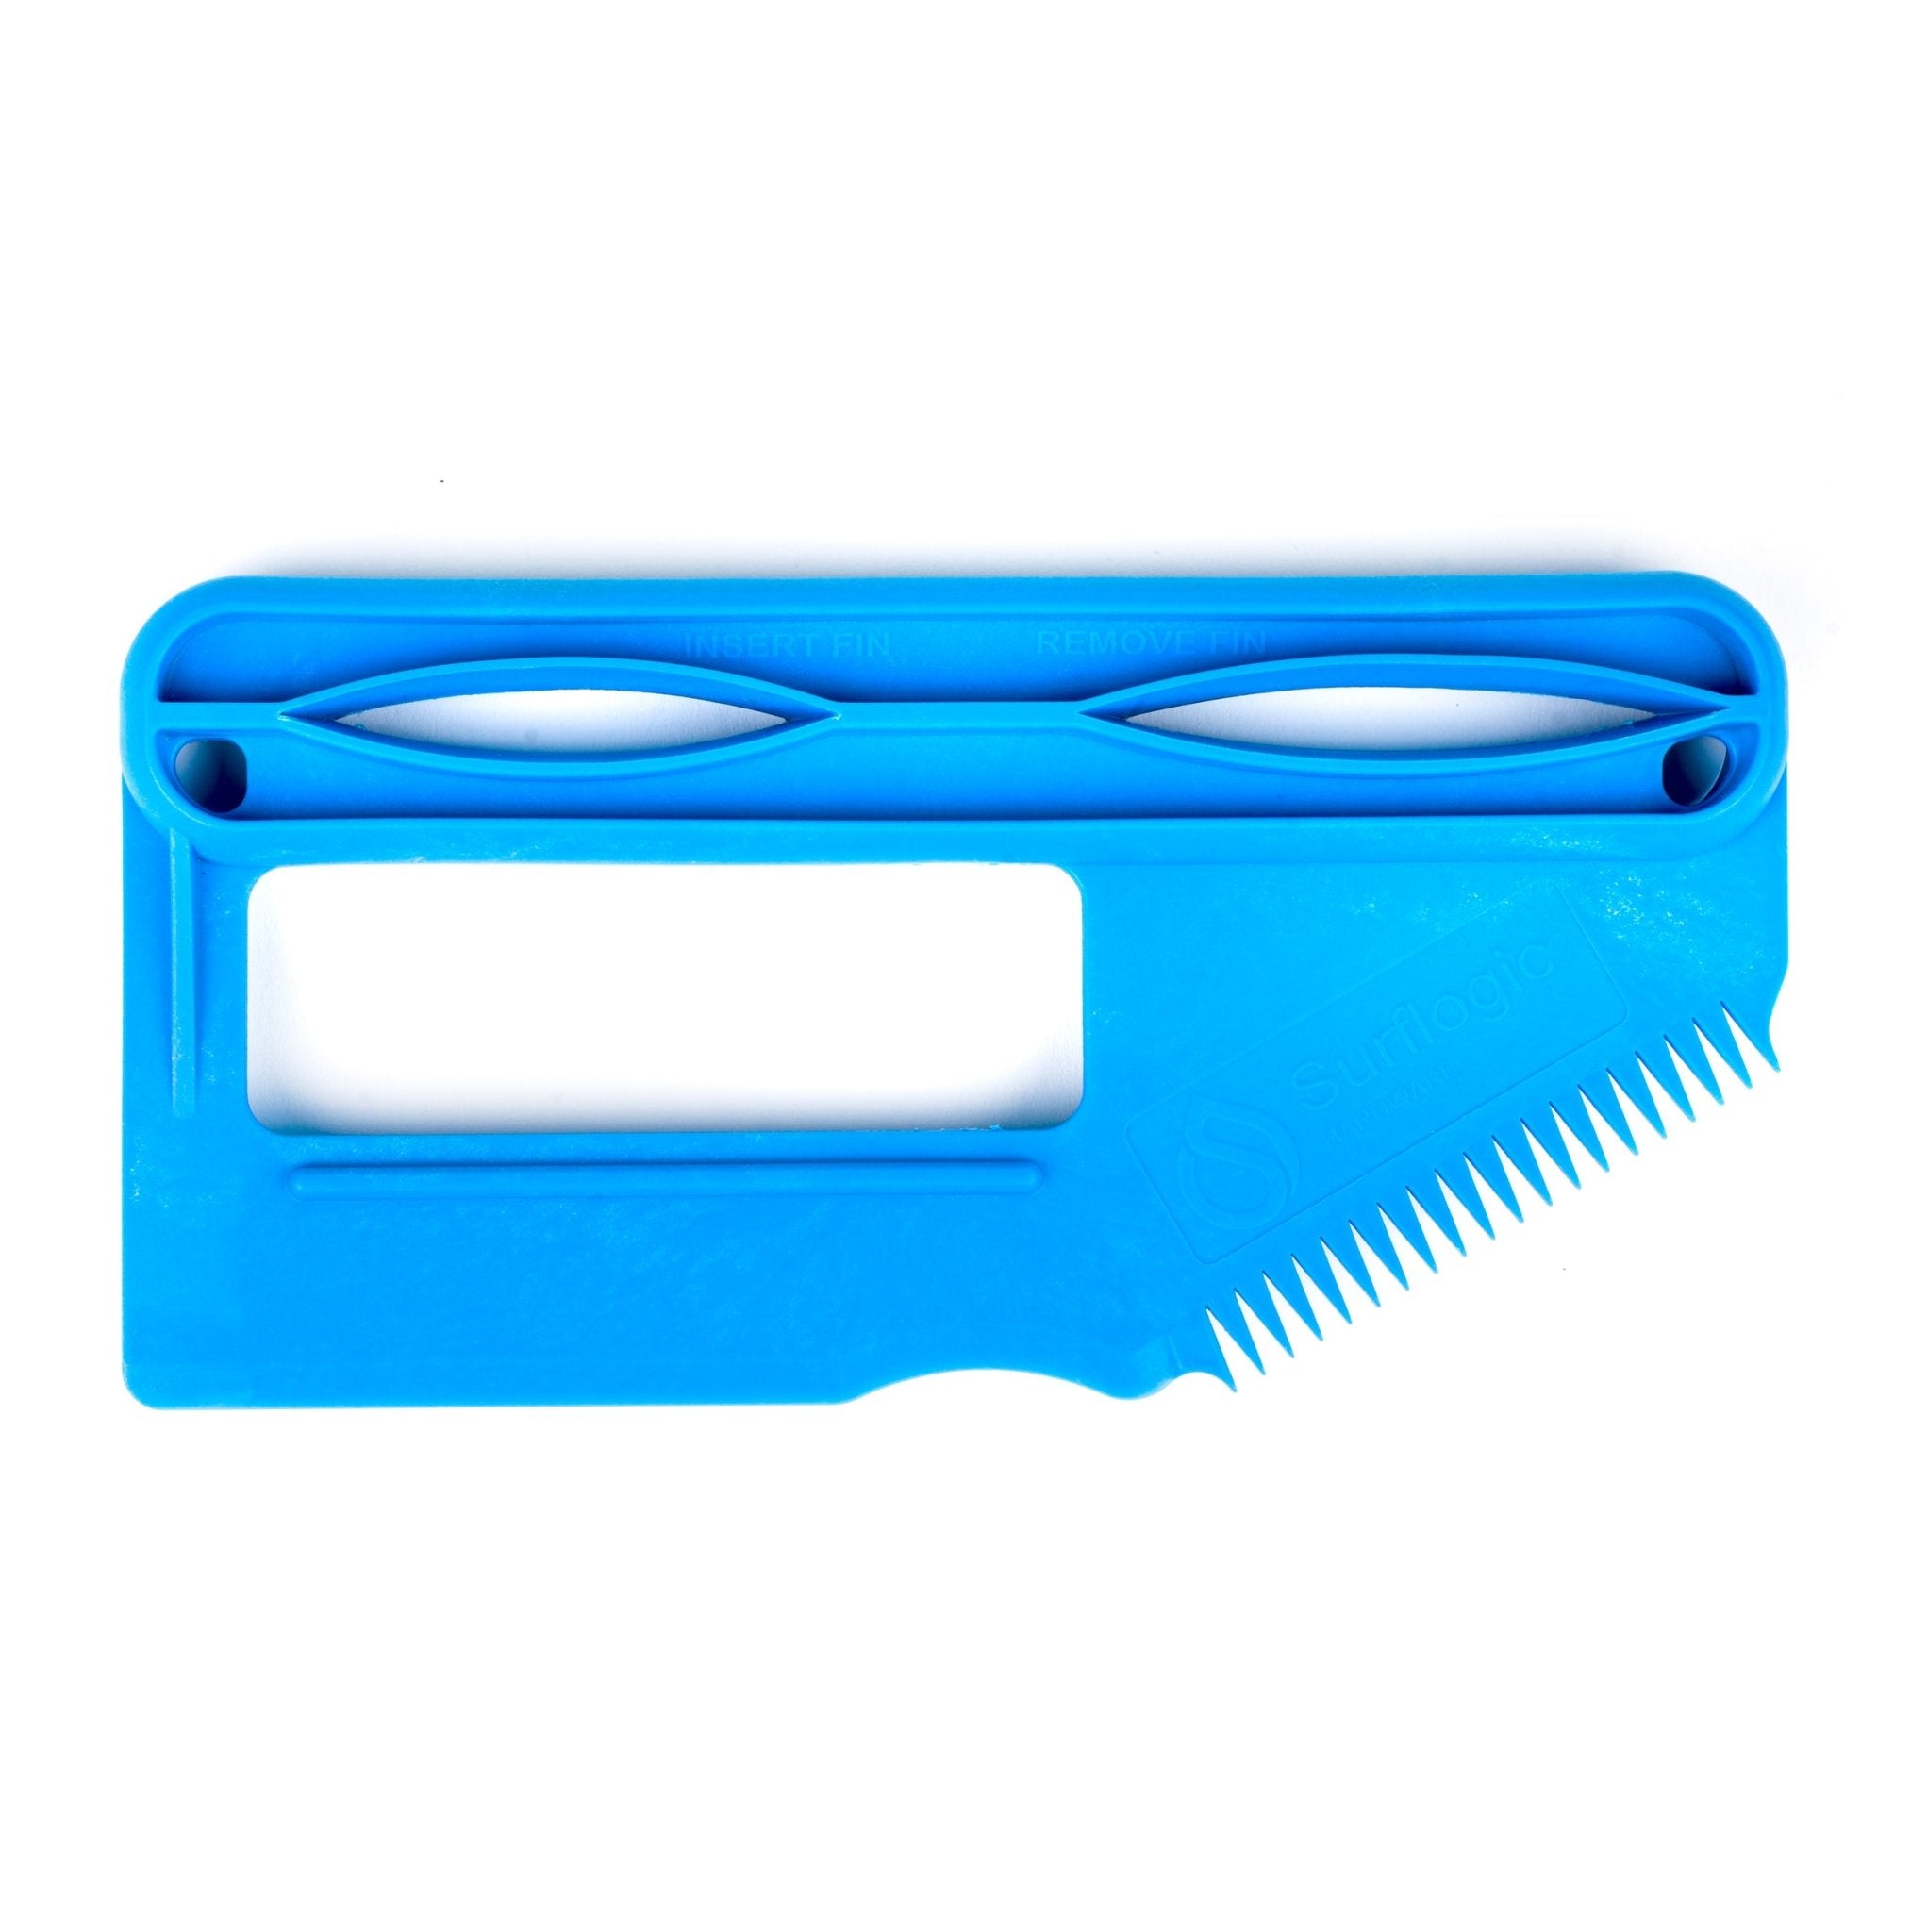 Surflogic Wax Comb & Fin Tool - Worthing Watersports - 59087 - Surfboards - Surflogic